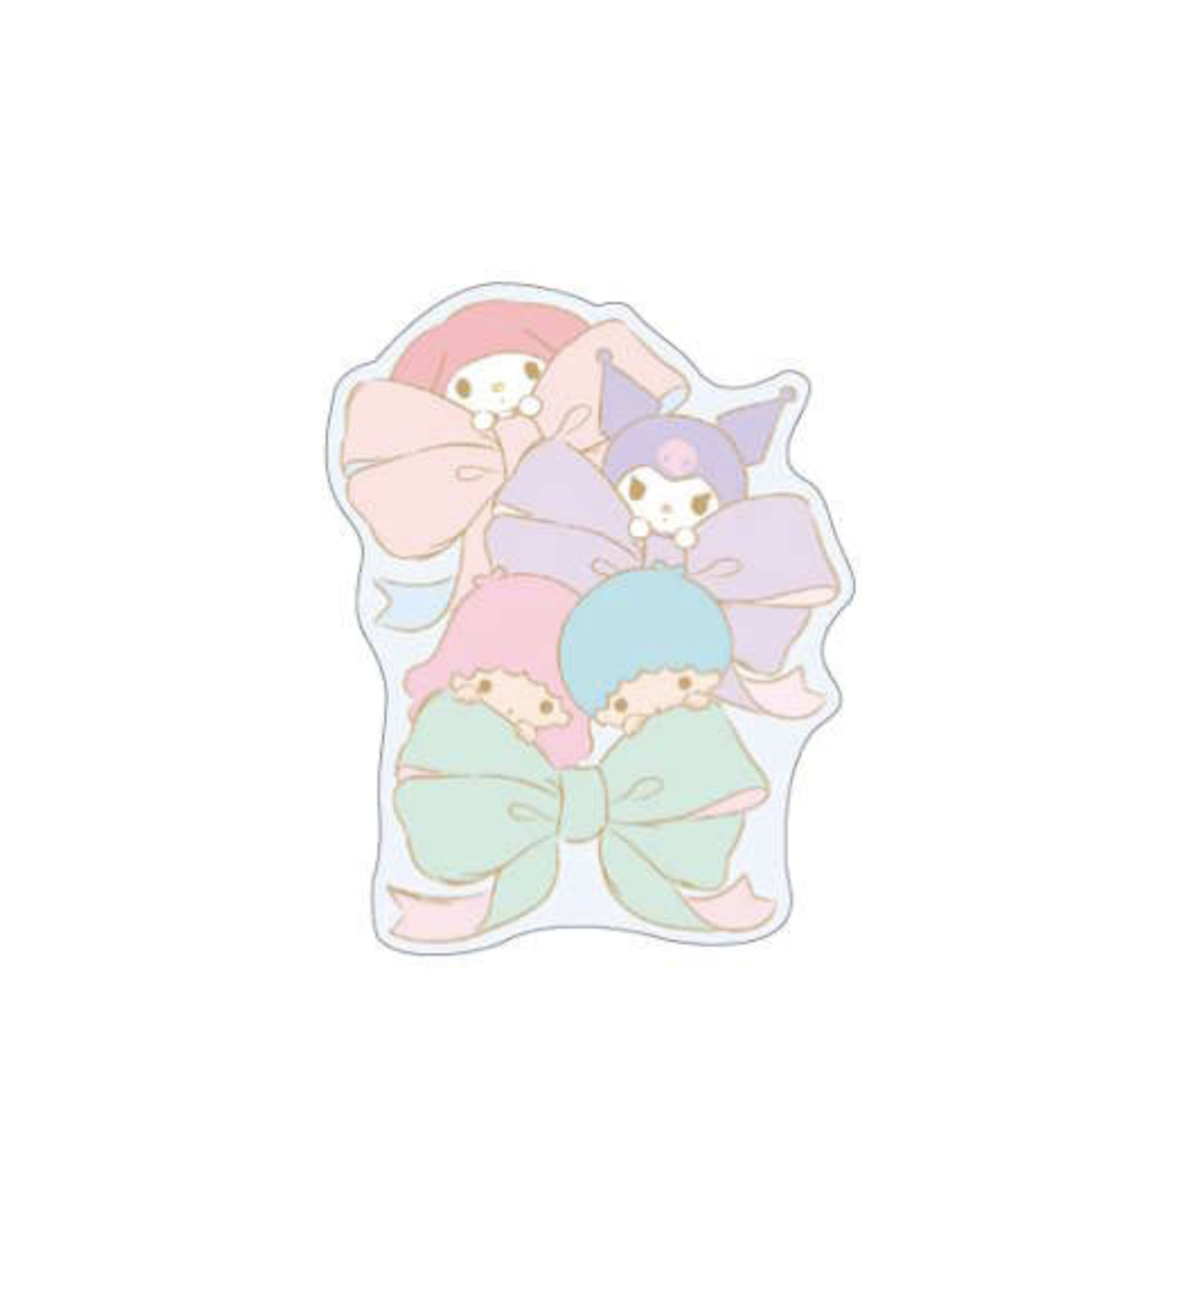 Sanrio Letter Sets: Cinnamoroll, My Melody, Kuromi, and Character